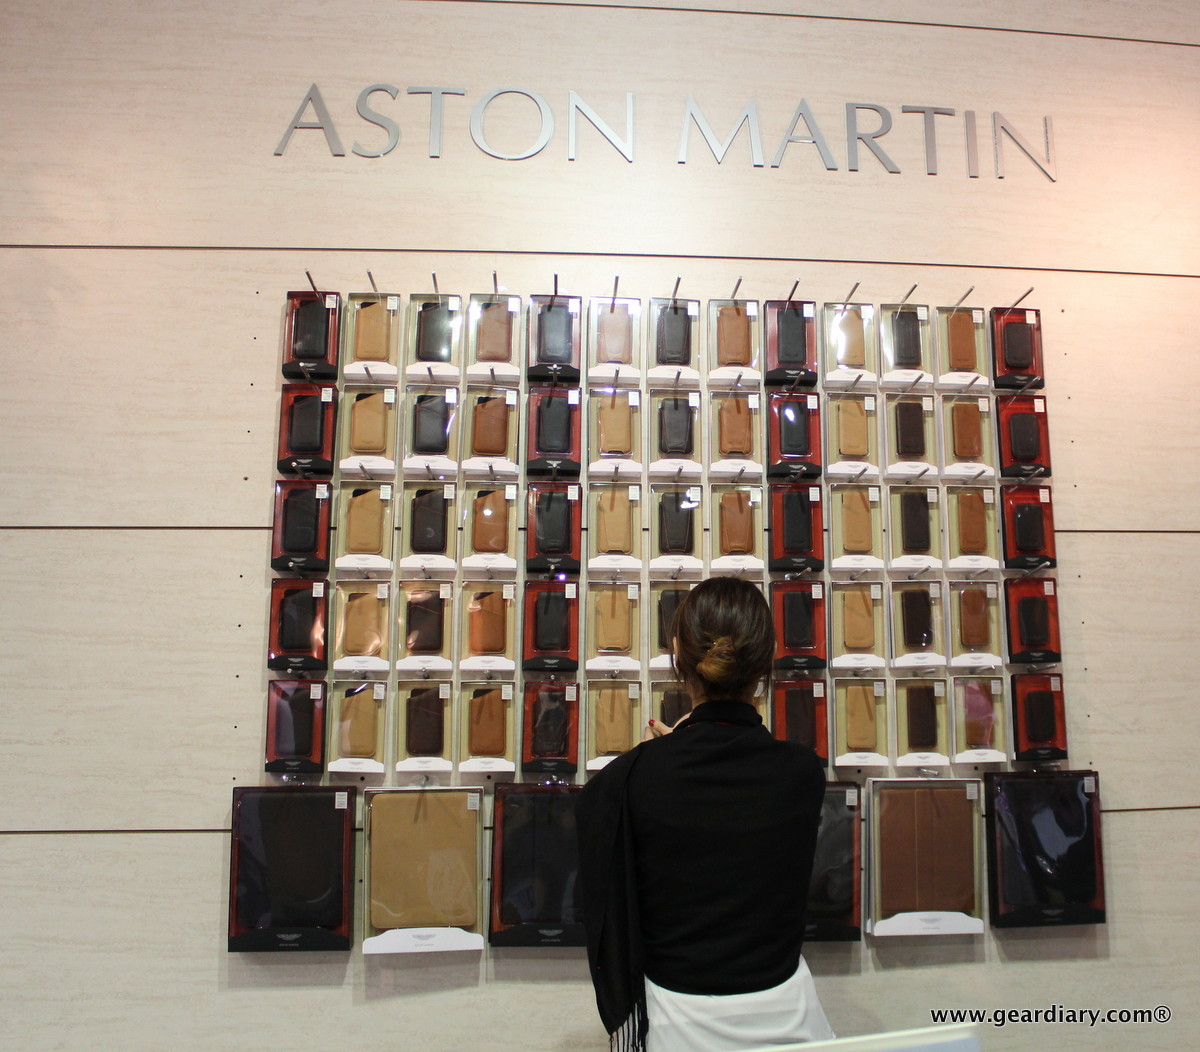 Beyzacases and Aston Martin CES Booth Tour